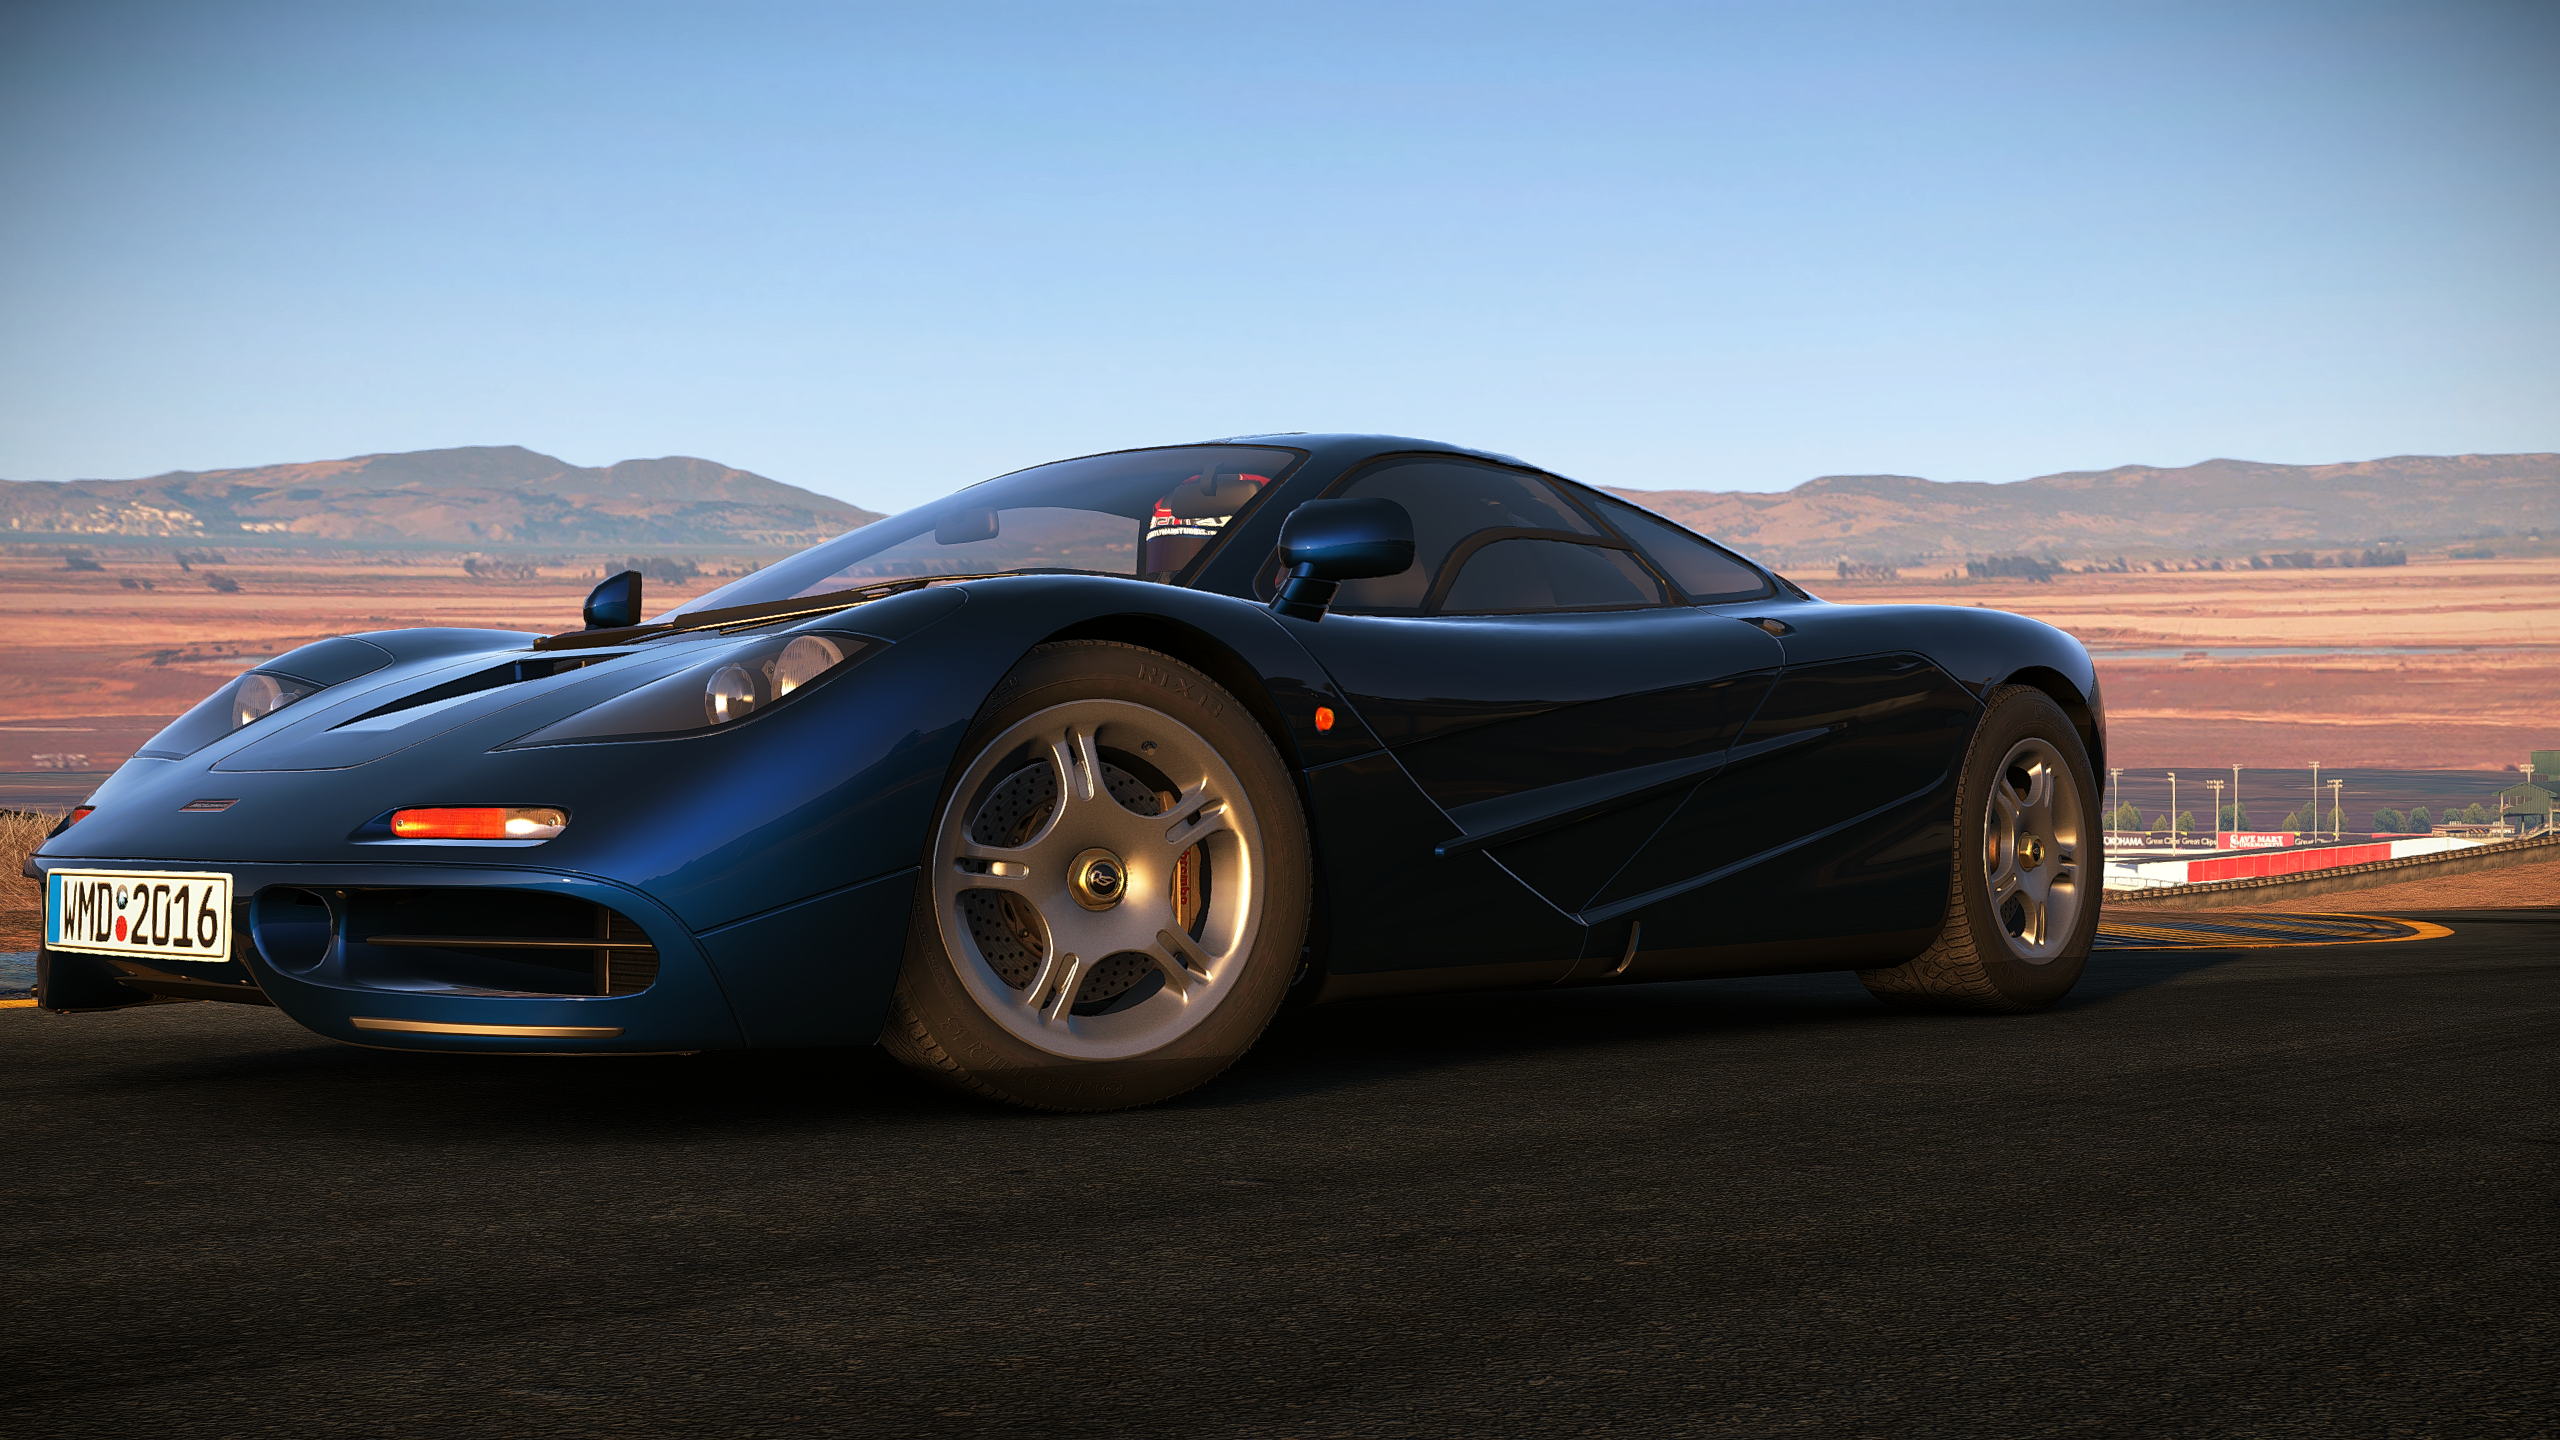 McLaren F1 Project Cars Video Games Numbers Screen Shot Car Vehicle 2560x1440